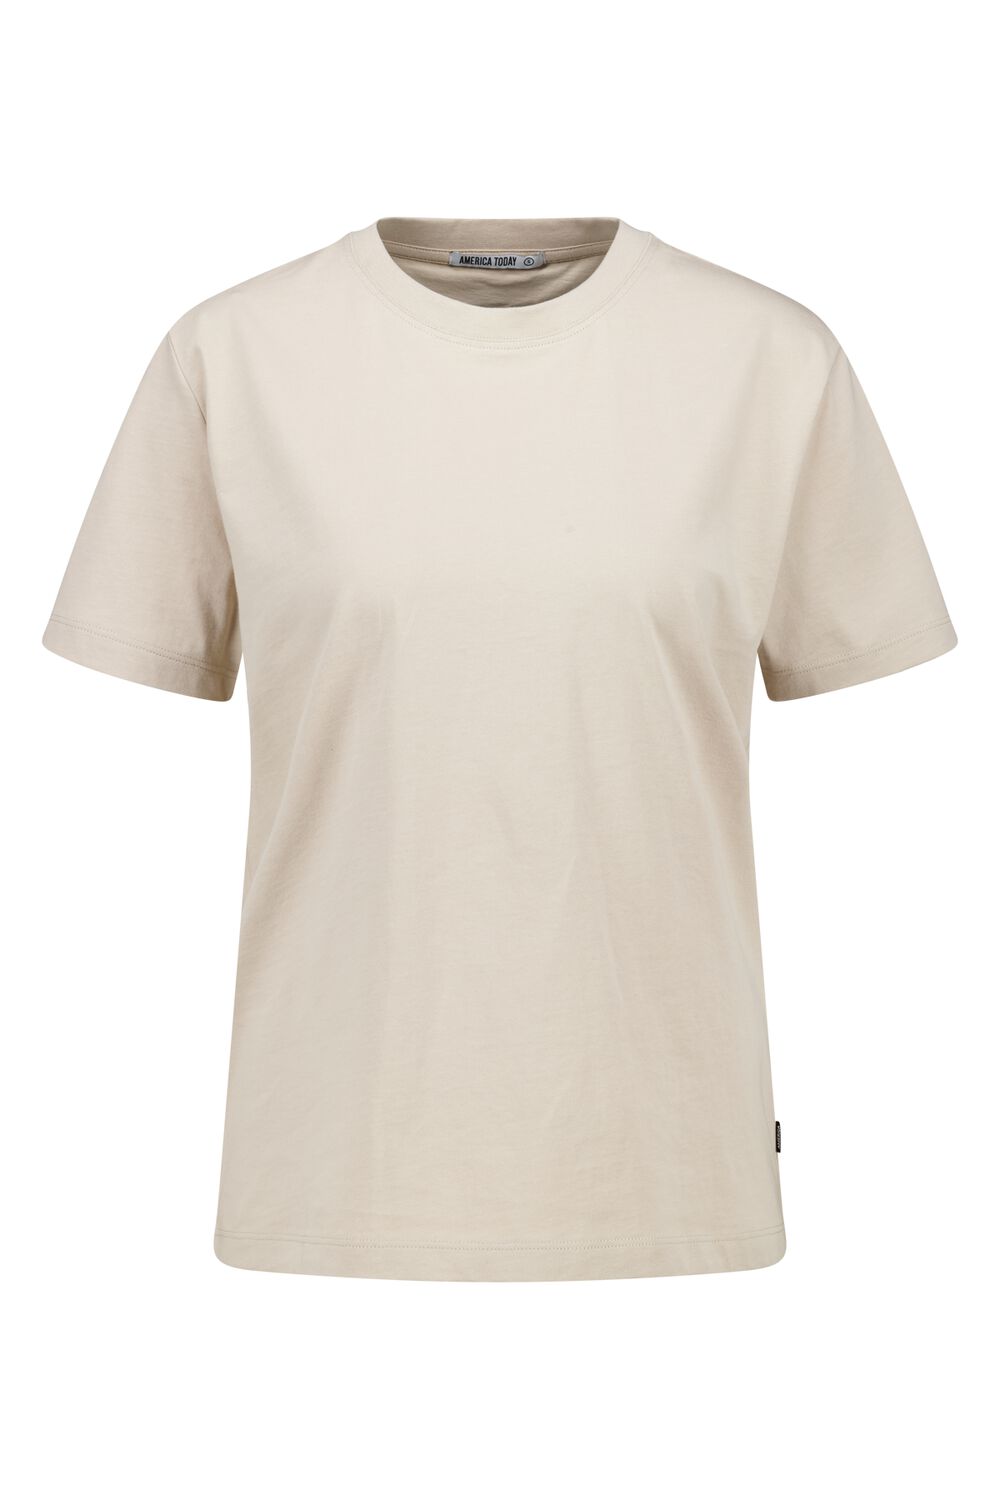 America Today Dames T-shirt Esther Beige